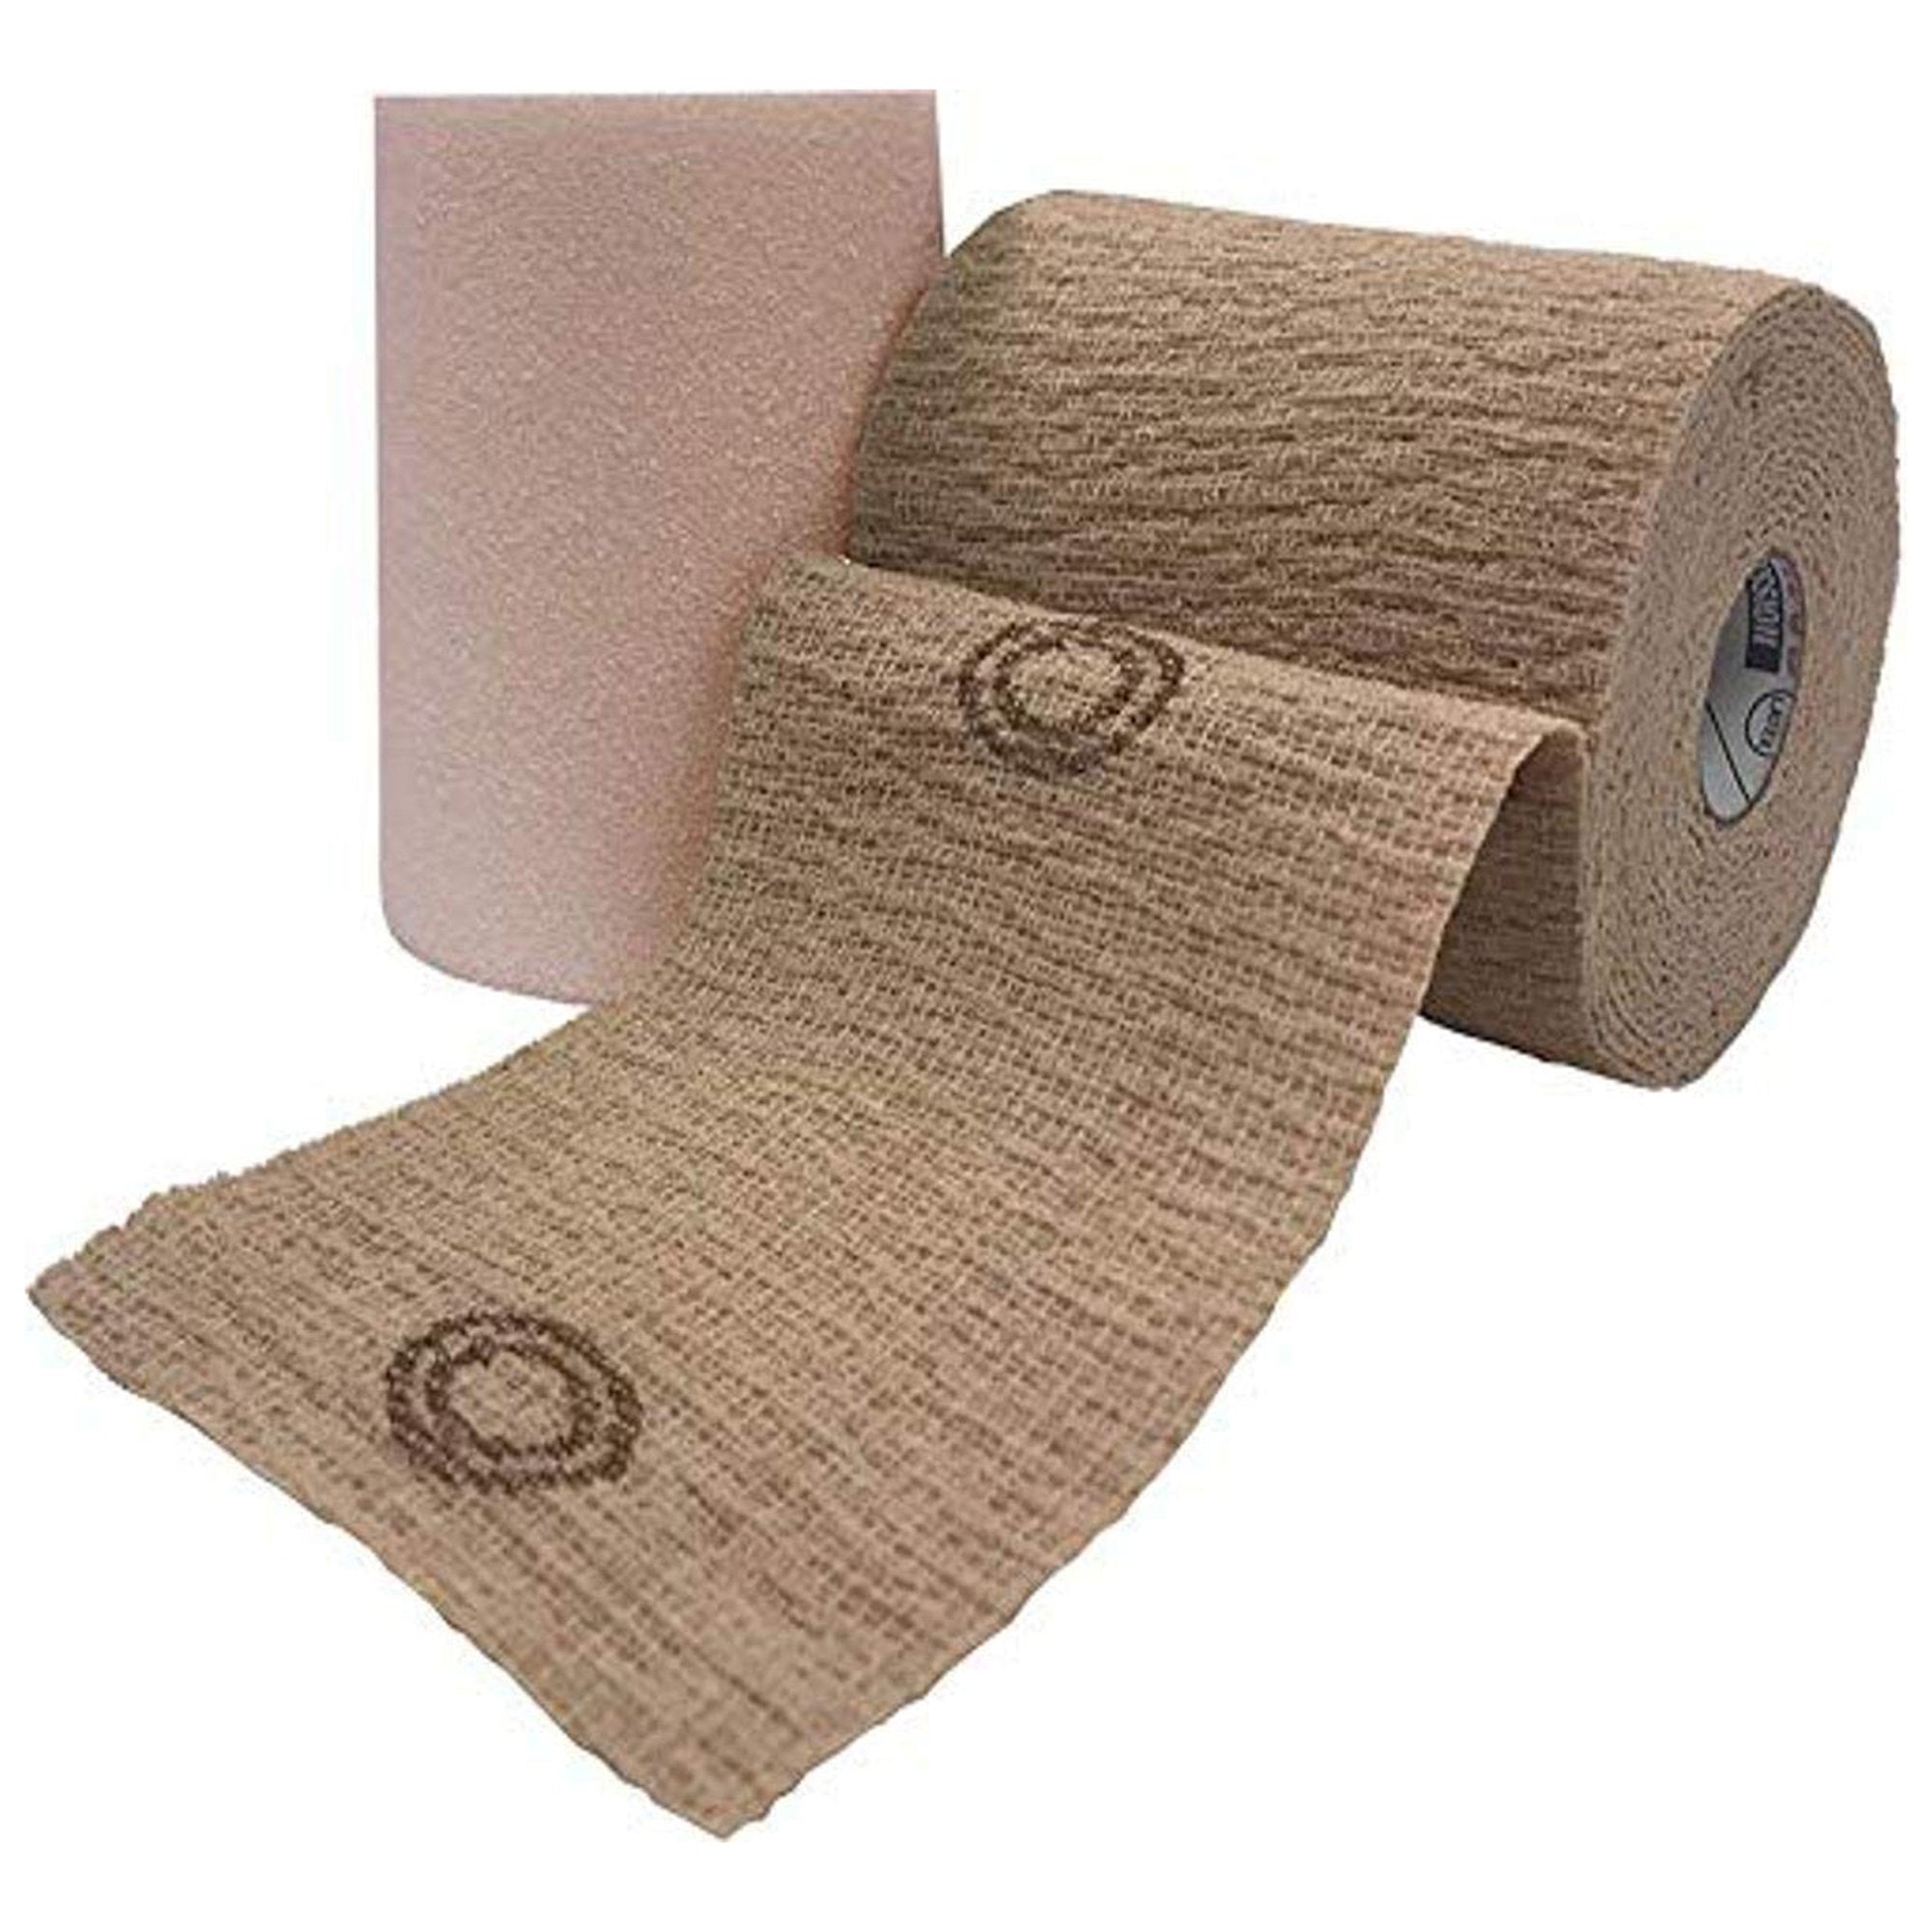 2 Layer Compression Bandage System CoFlex® TLC Calamine with Indicators 4 Inch X 6 Yard / 4 Inch X 7 Yard Self-Adherent / Pull On Closure Tan NonSterile 20 to 30 mmHg